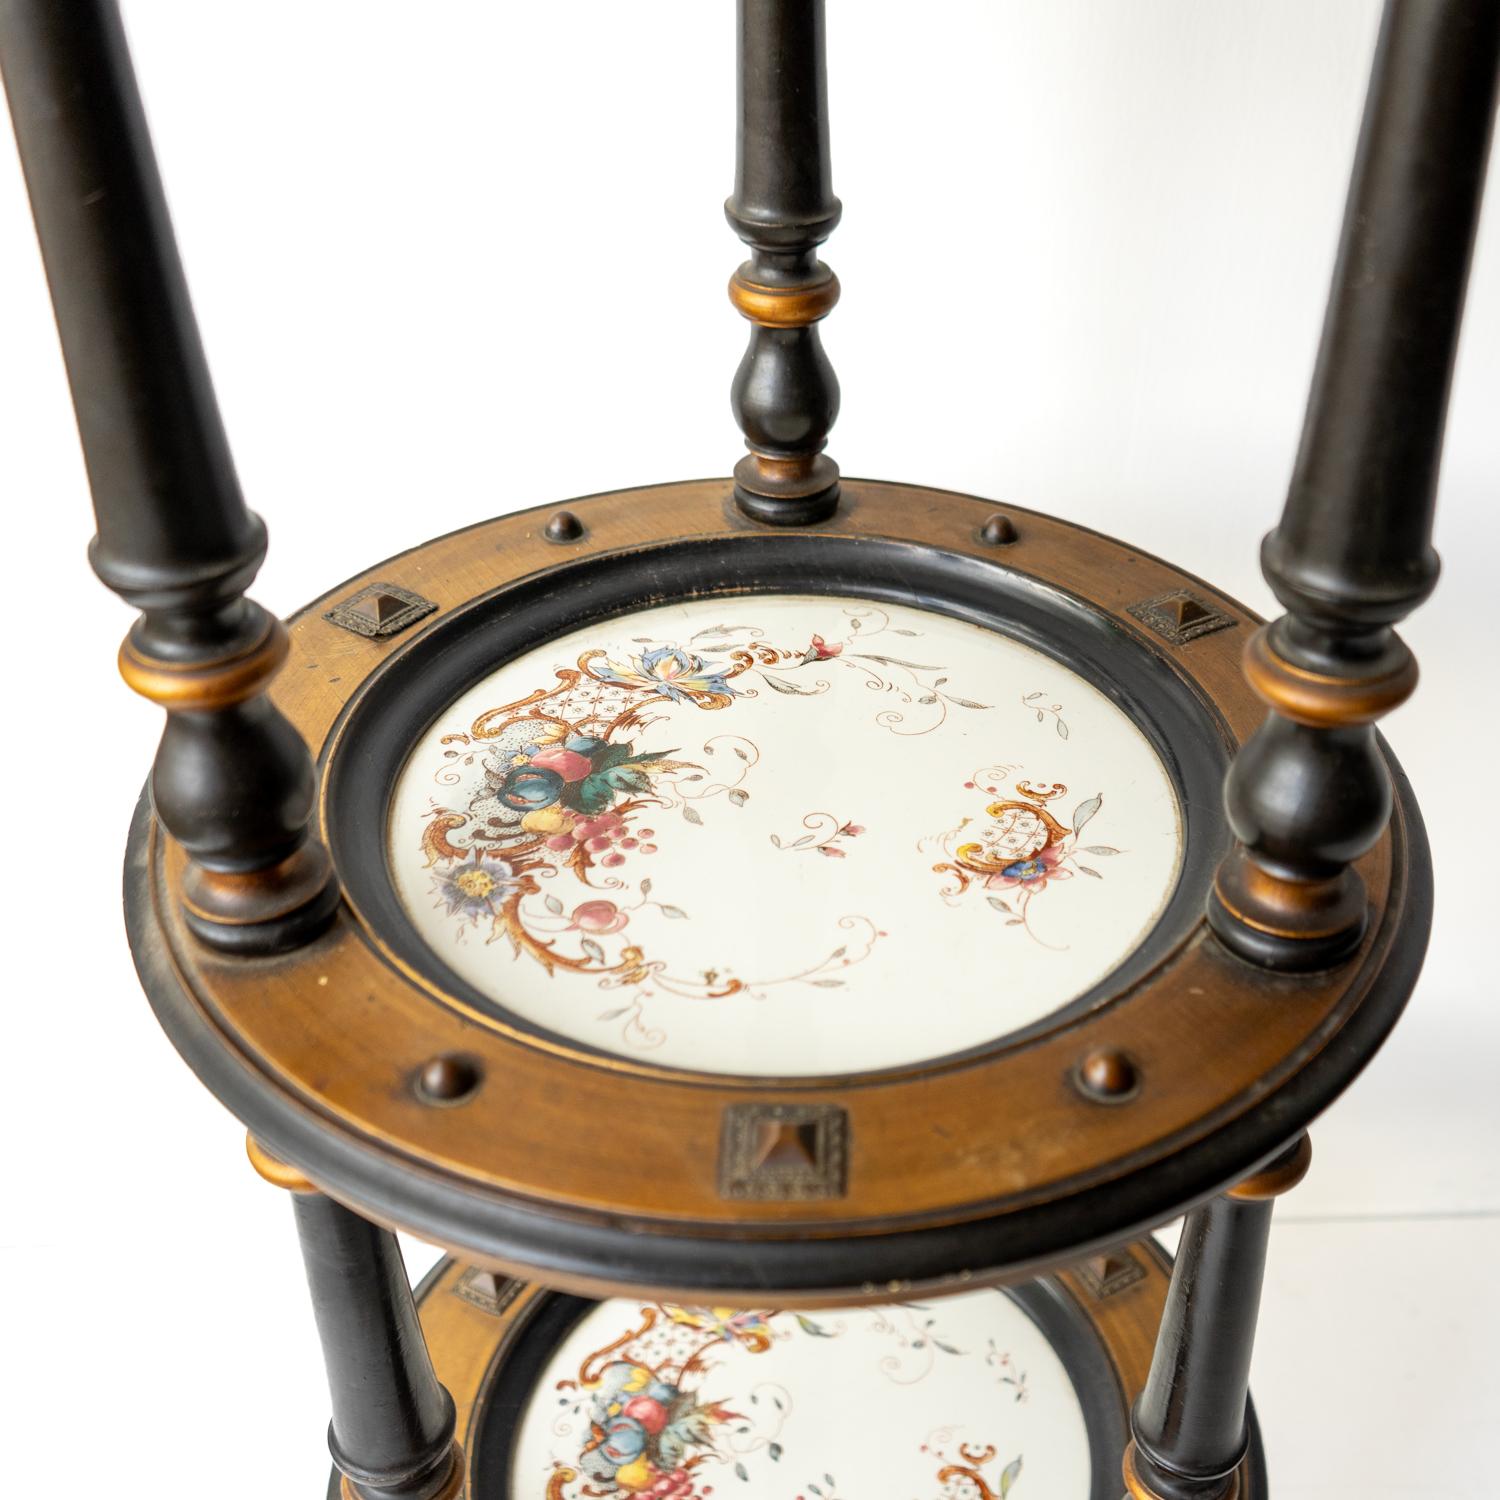 Aesthetic Movement Three Tiered Cake Stand, 19th Century Victorian cake display For Sale 6